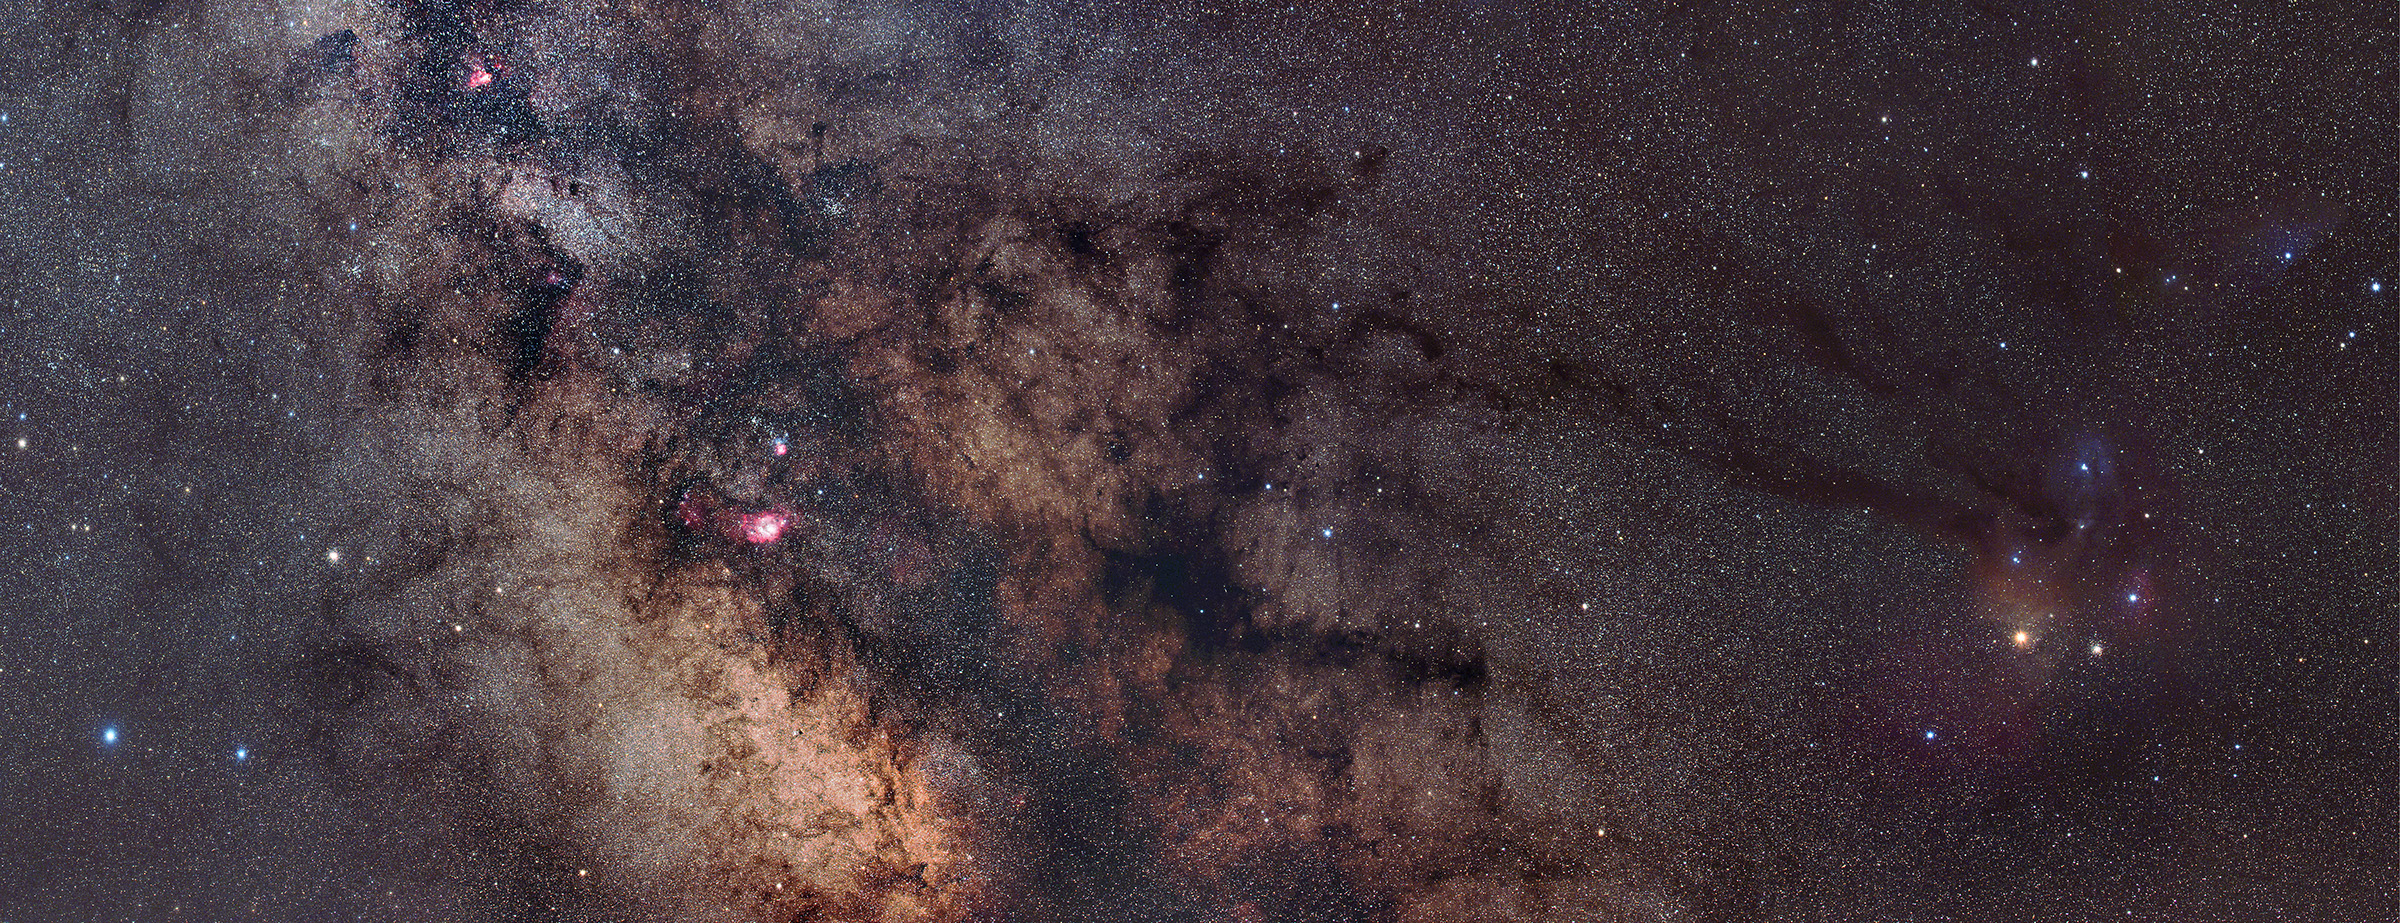 10 - Rho Ophiuchi to the Milky Way Pano